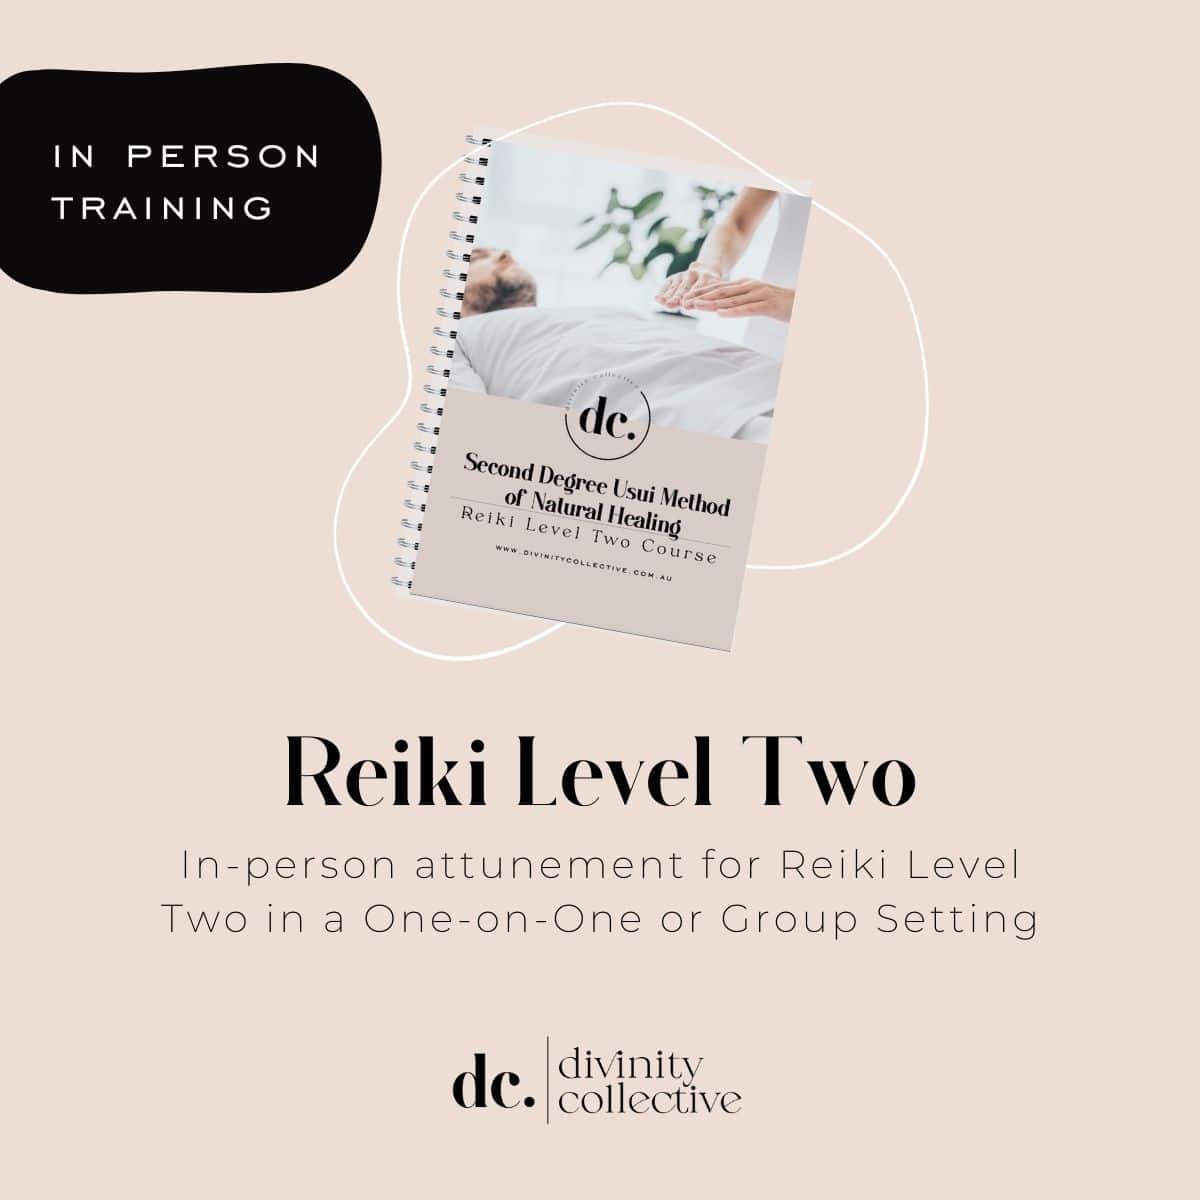 Reiki Level Two Training Wynnum Manly Divinity Collective